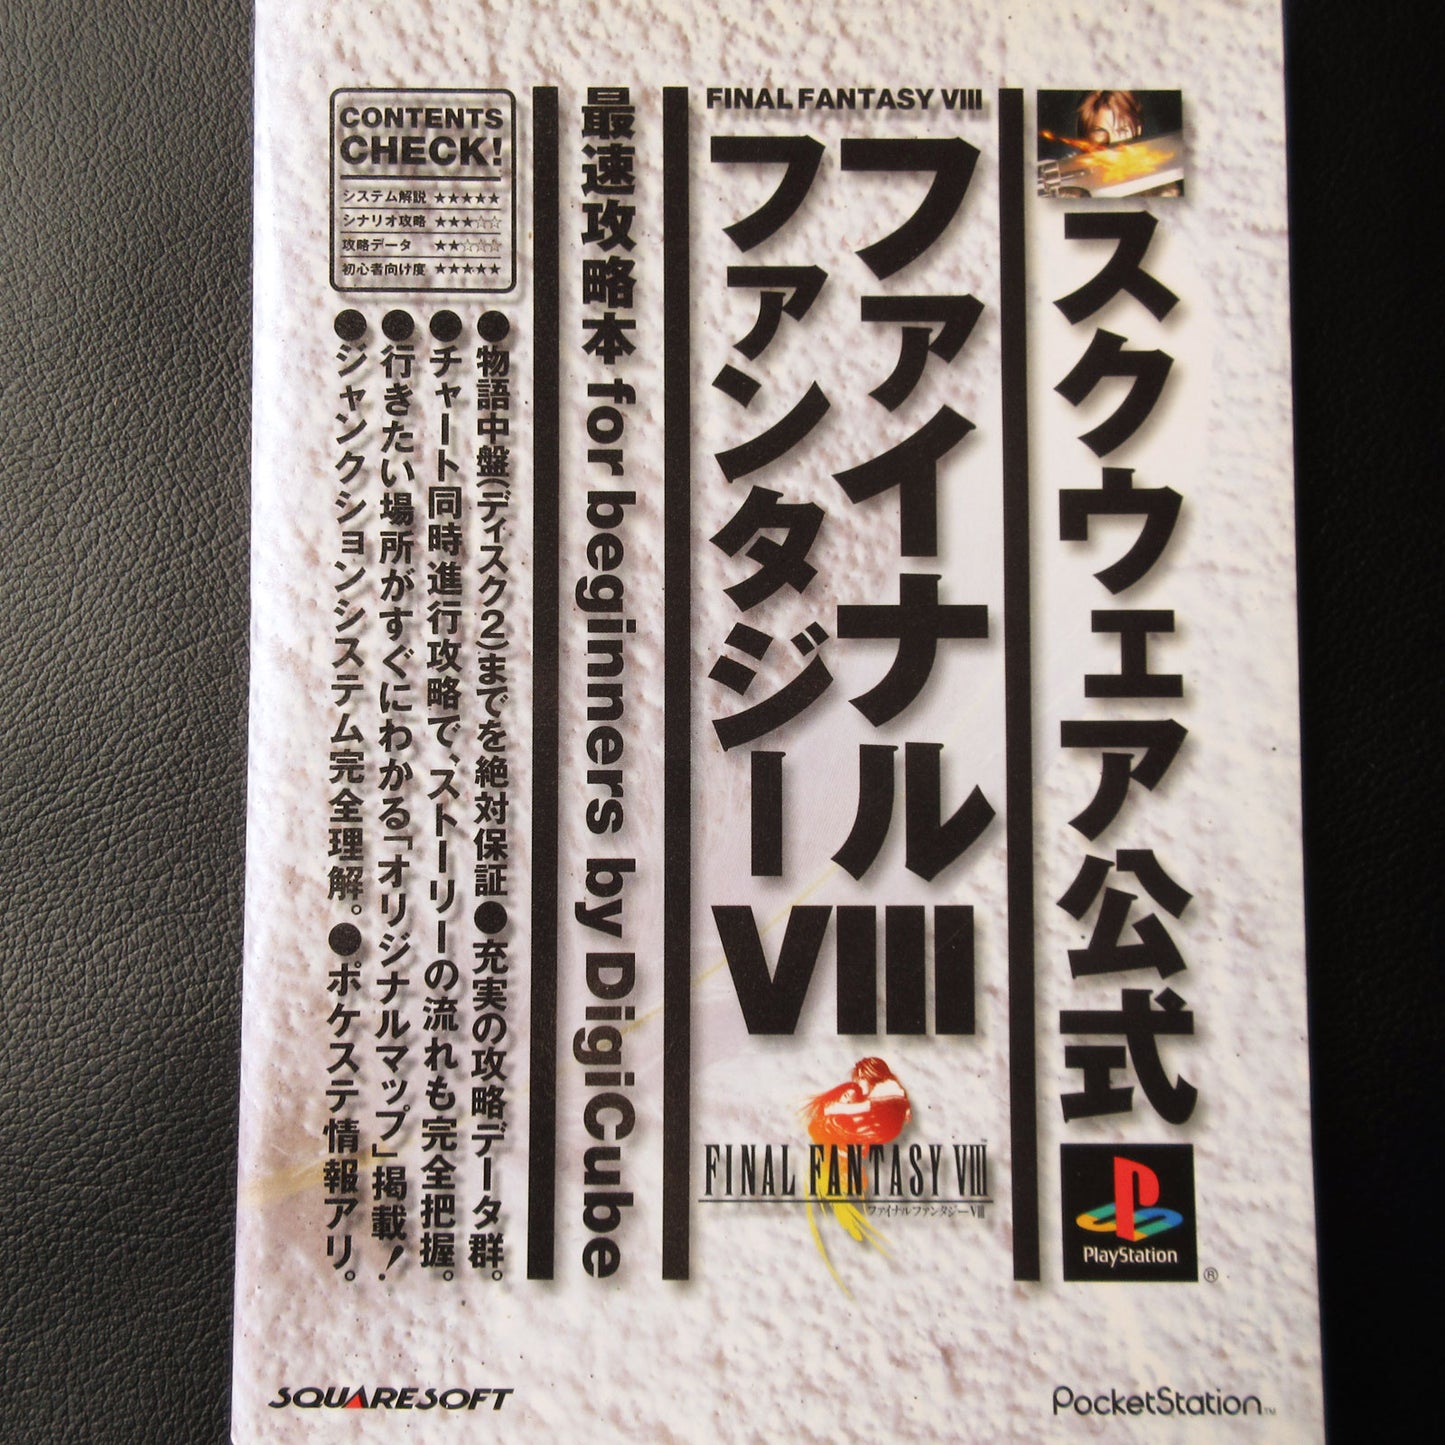 Final Fantasy VIII 8 Official First Guide Book for Beginners